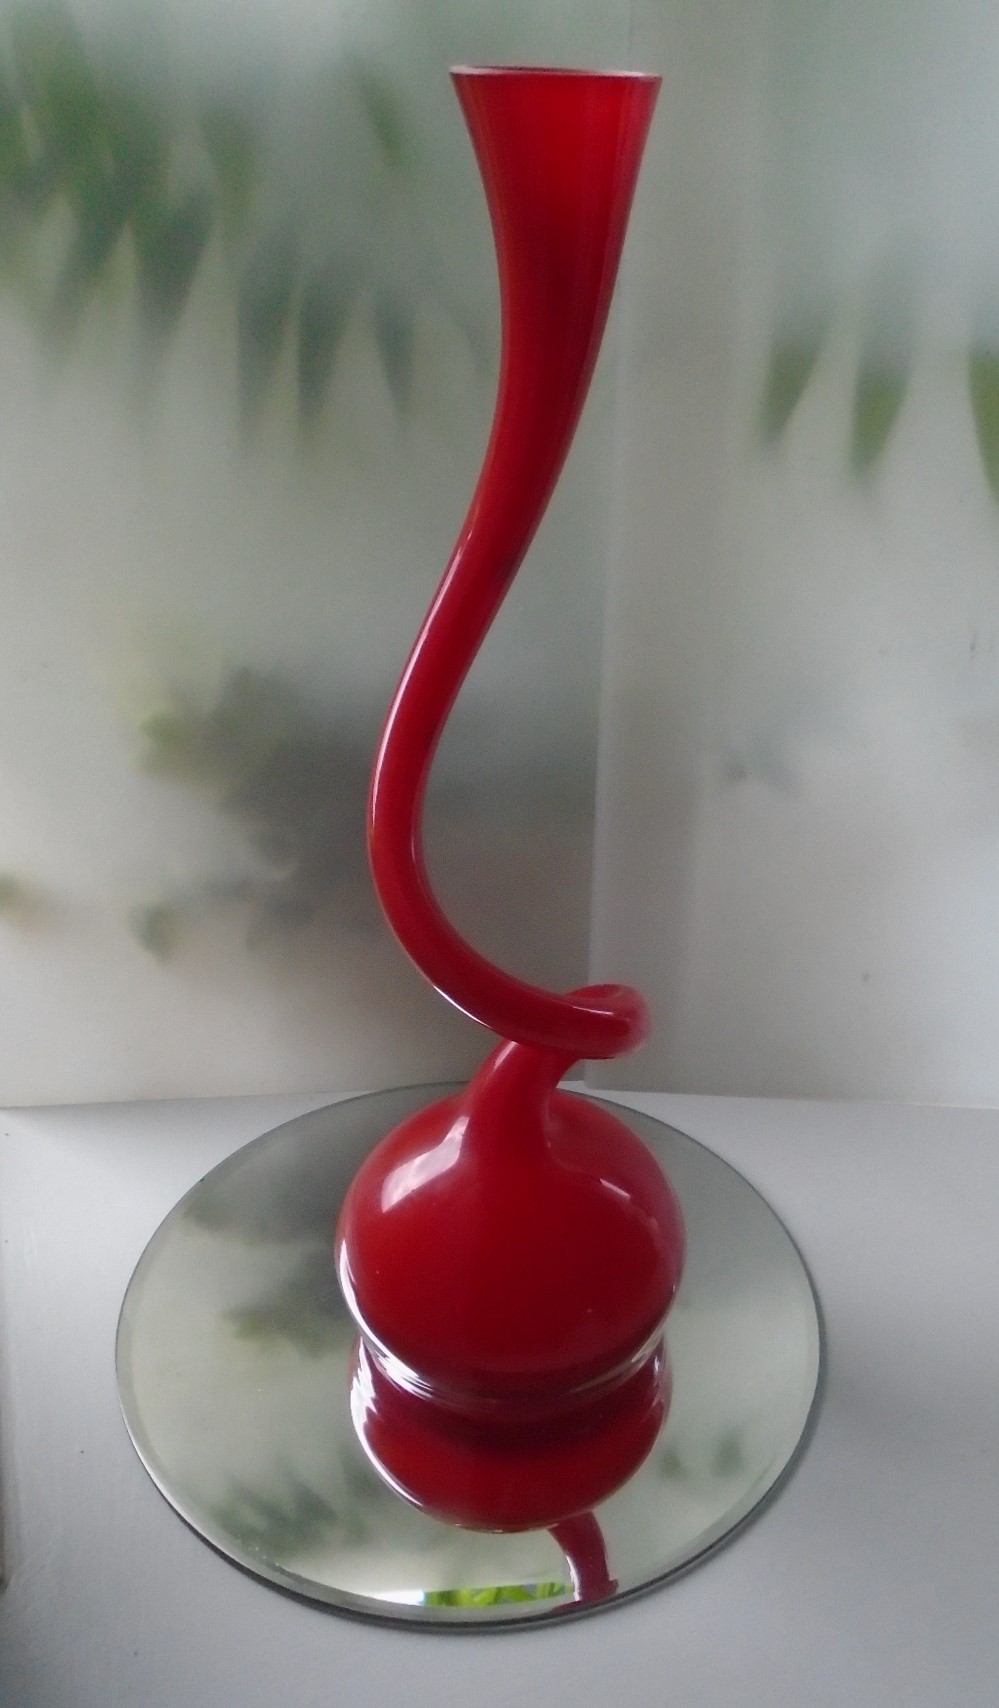 Danish Glass Ware in the form of this Large handmade and individual formed Britt Bonnesen Glass “Swing” Vase 